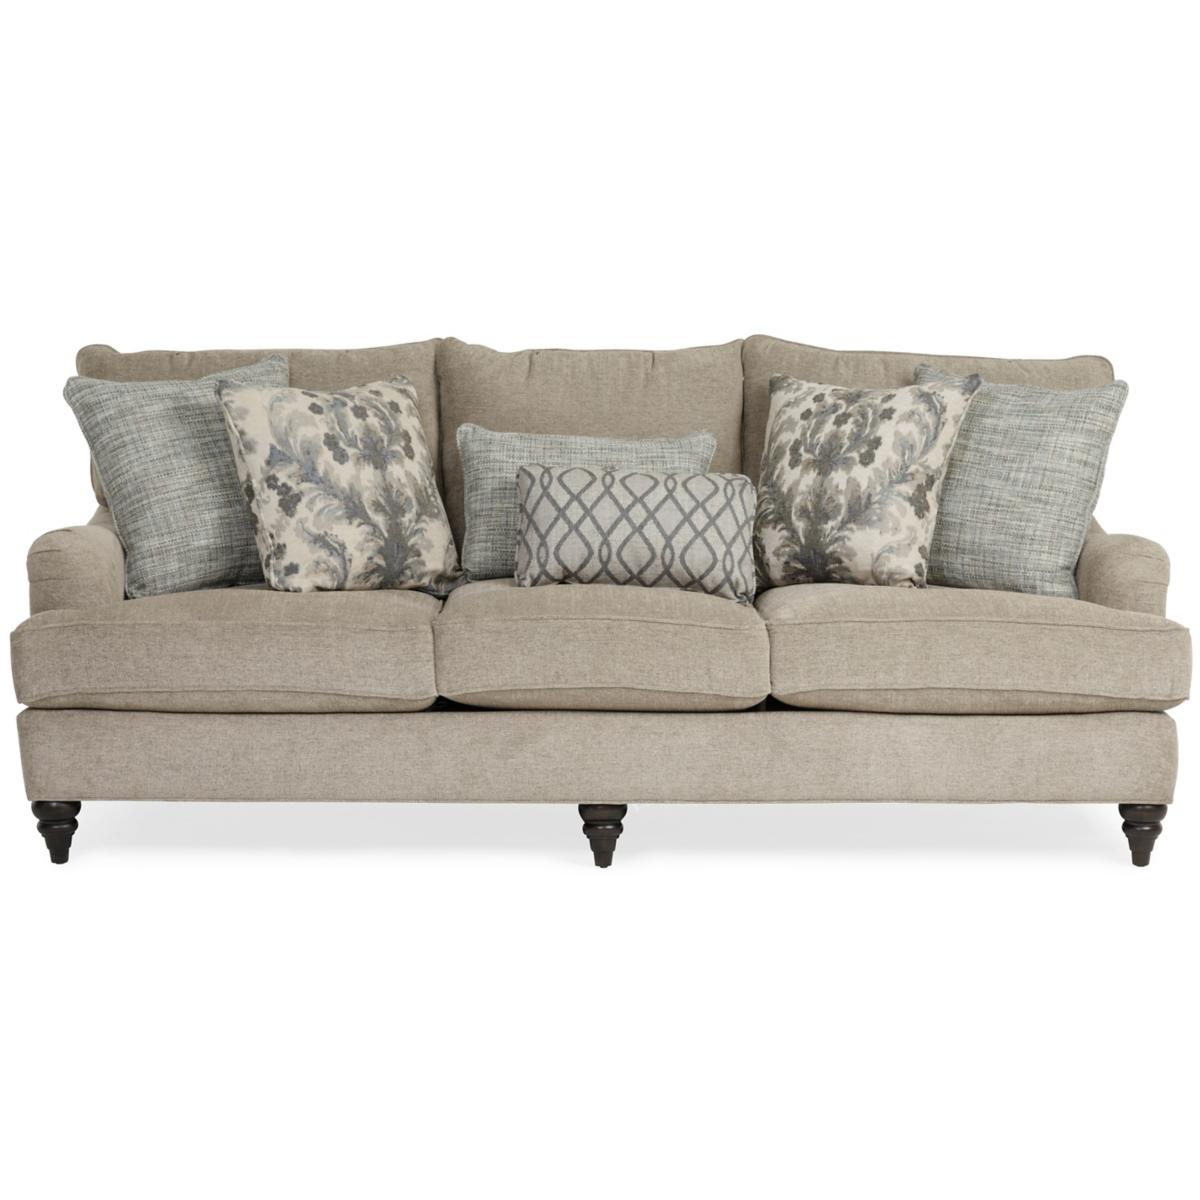 | Sofa Shelby Furniture 3-Seat Star